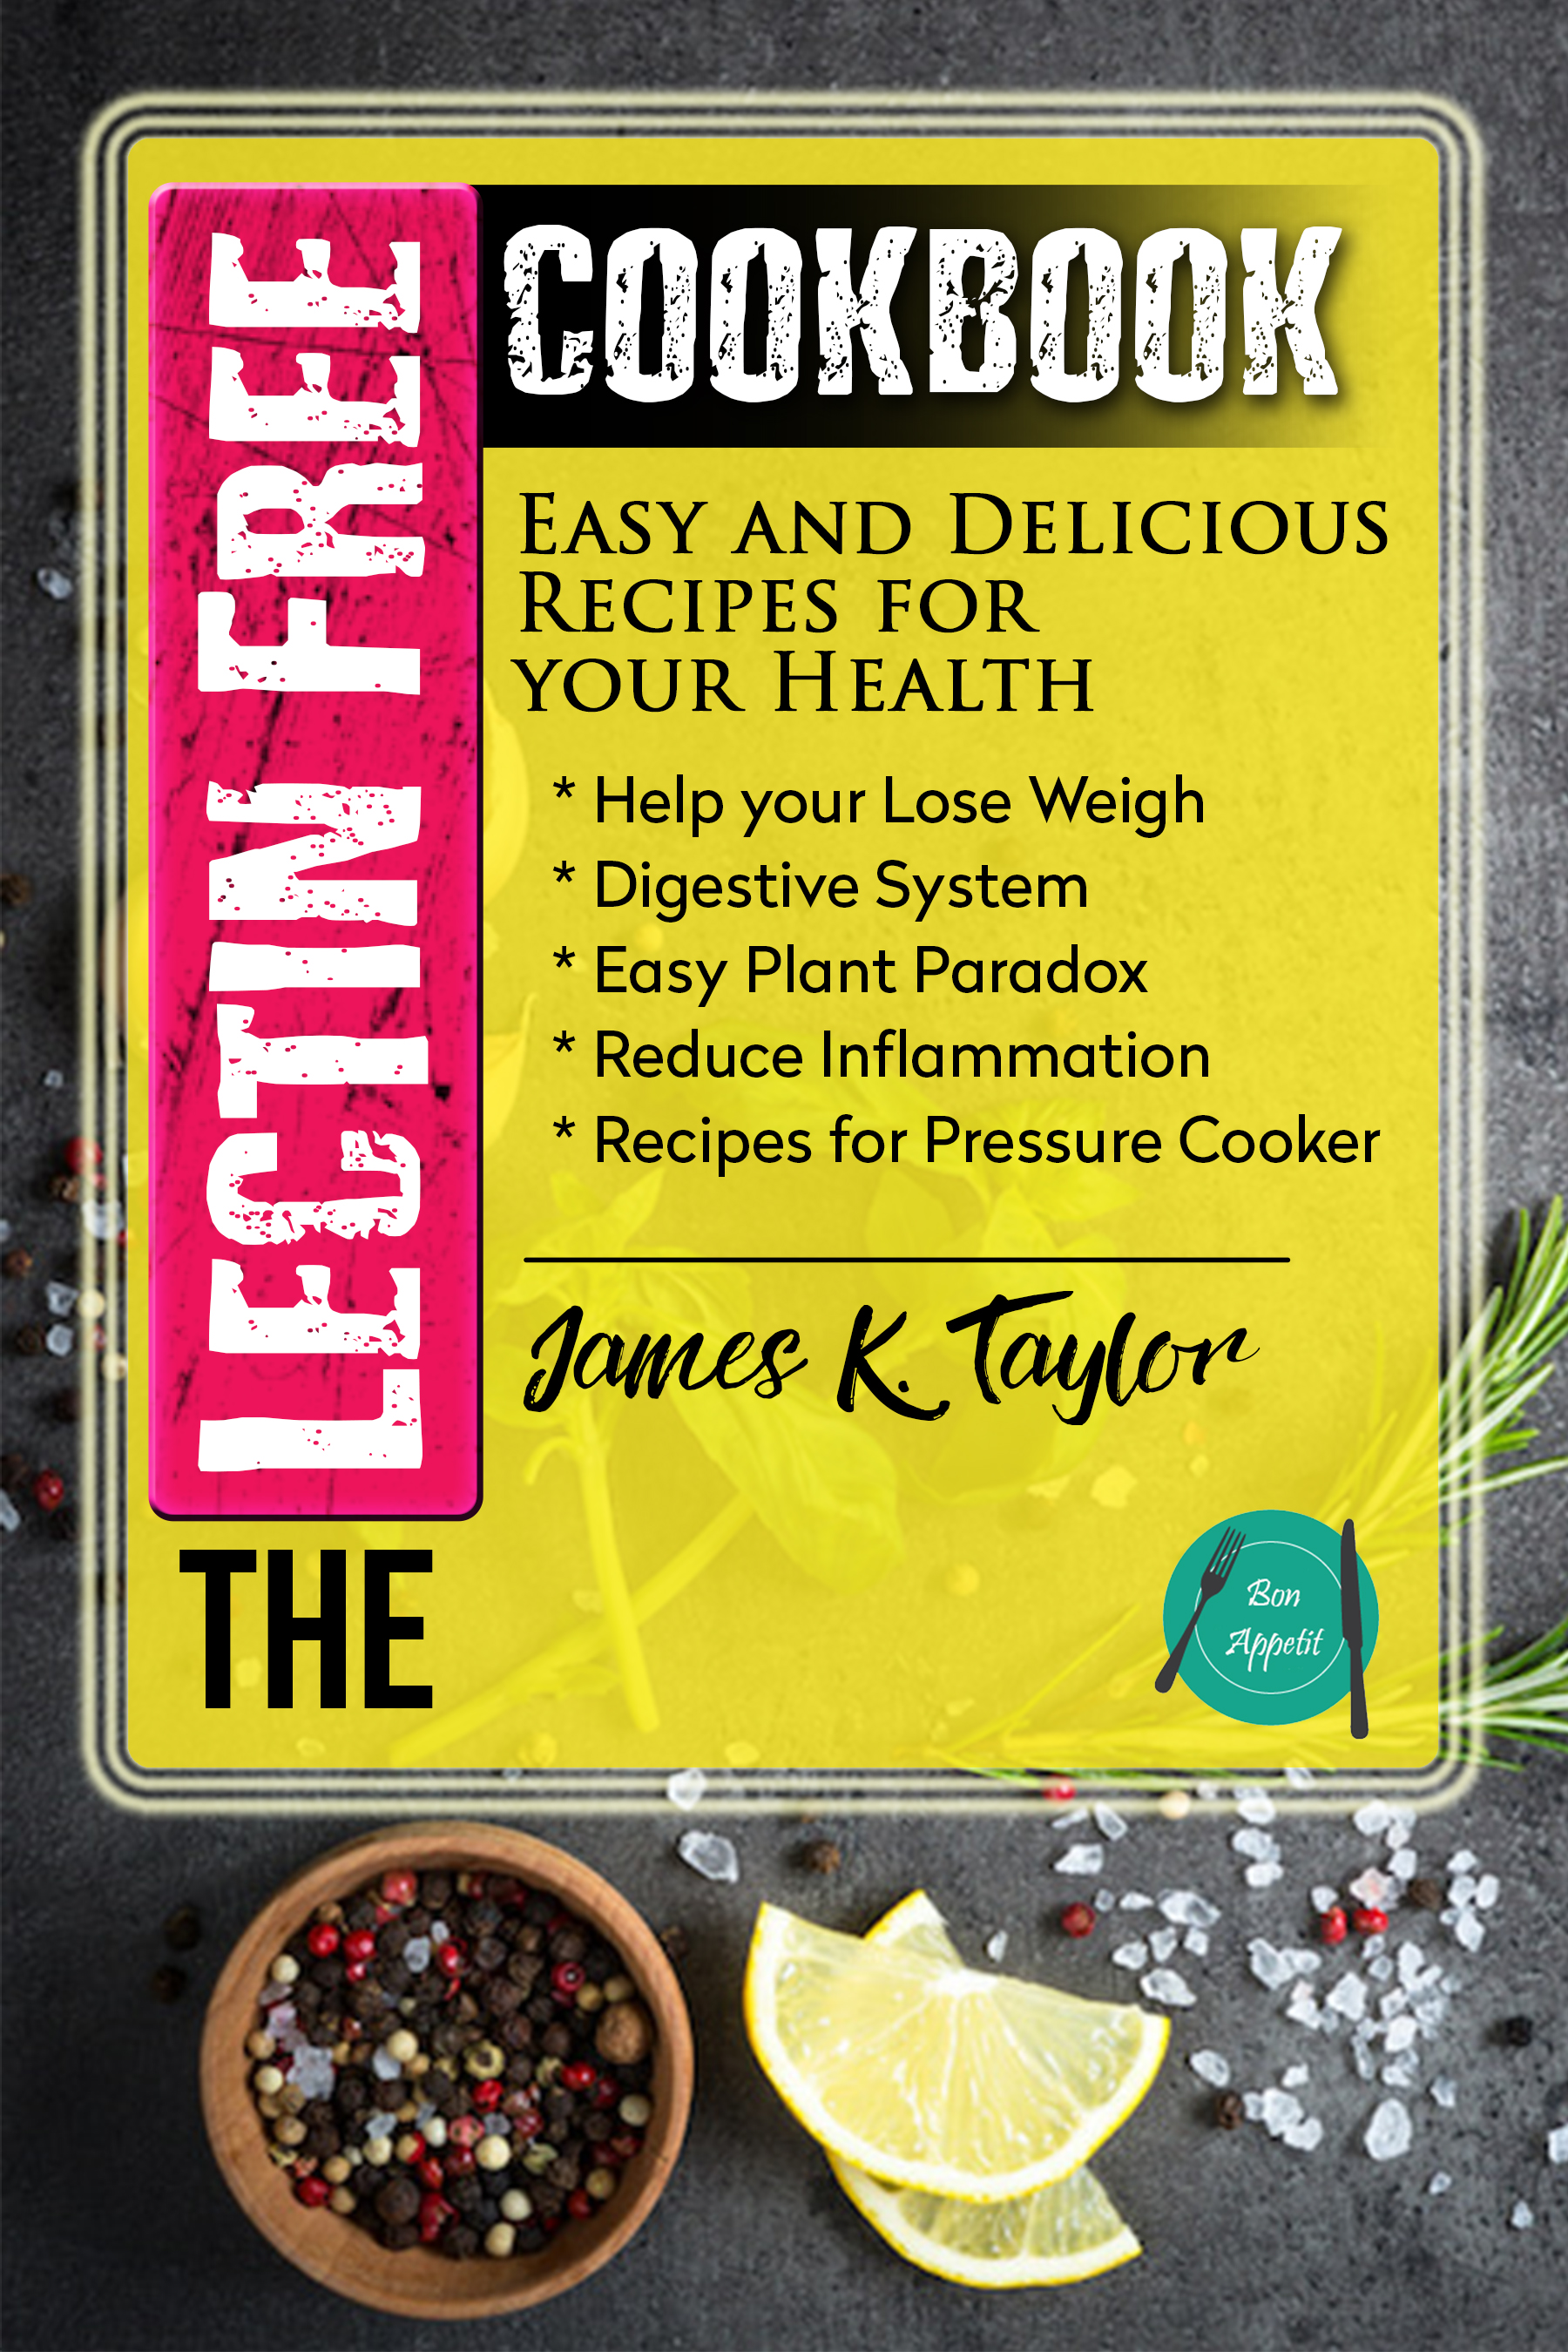 FREE: The Lectin Free Cookbook by James K. Taylor